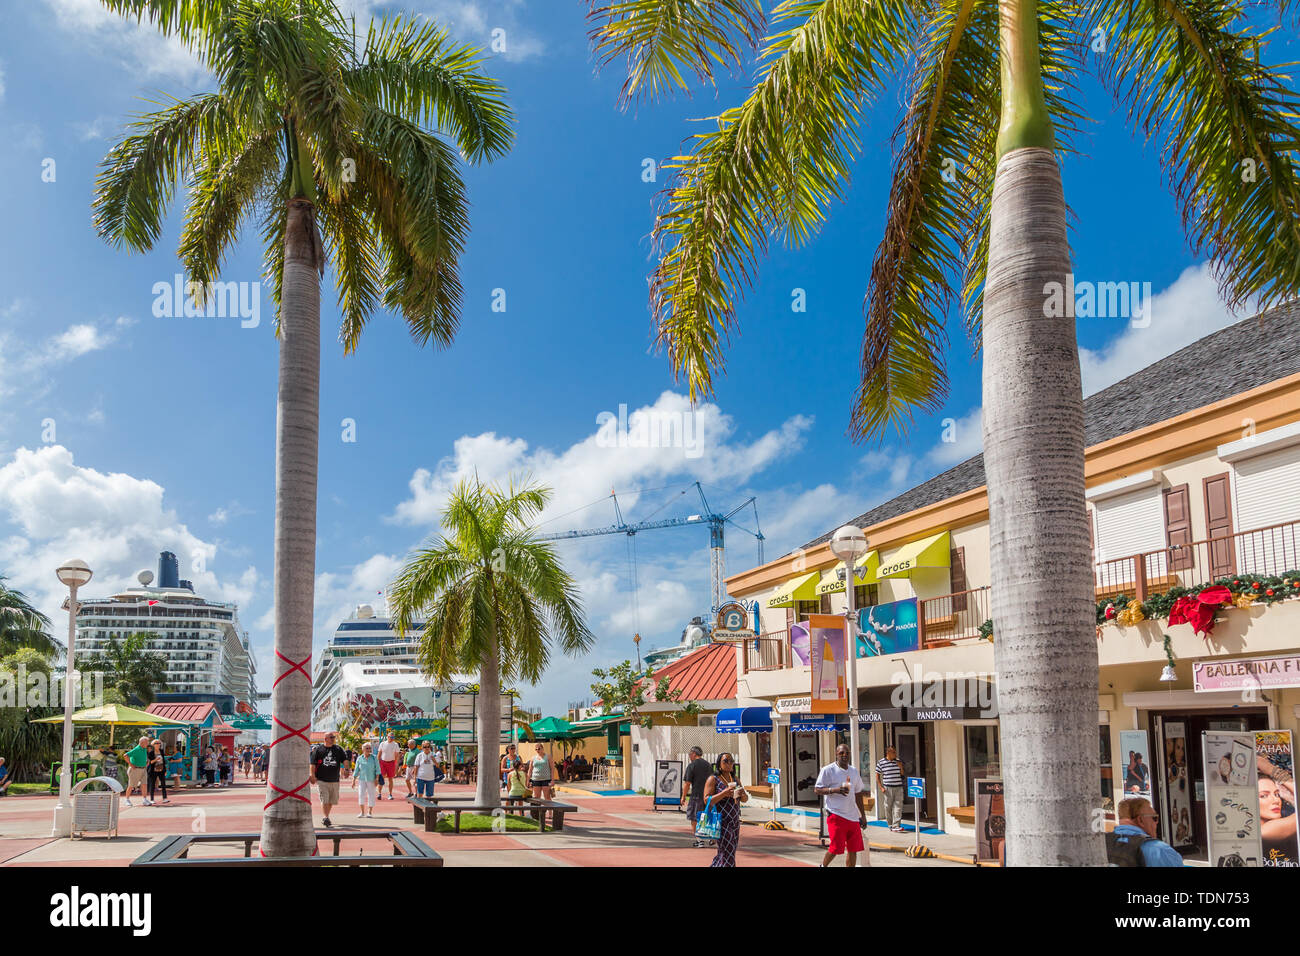 PHILIPSBURG, SINT MAARTEN - December 13, 2016: St. Maarten's economy is based on tourism from tourists staying on the island or from the many cruise l Stock Photo